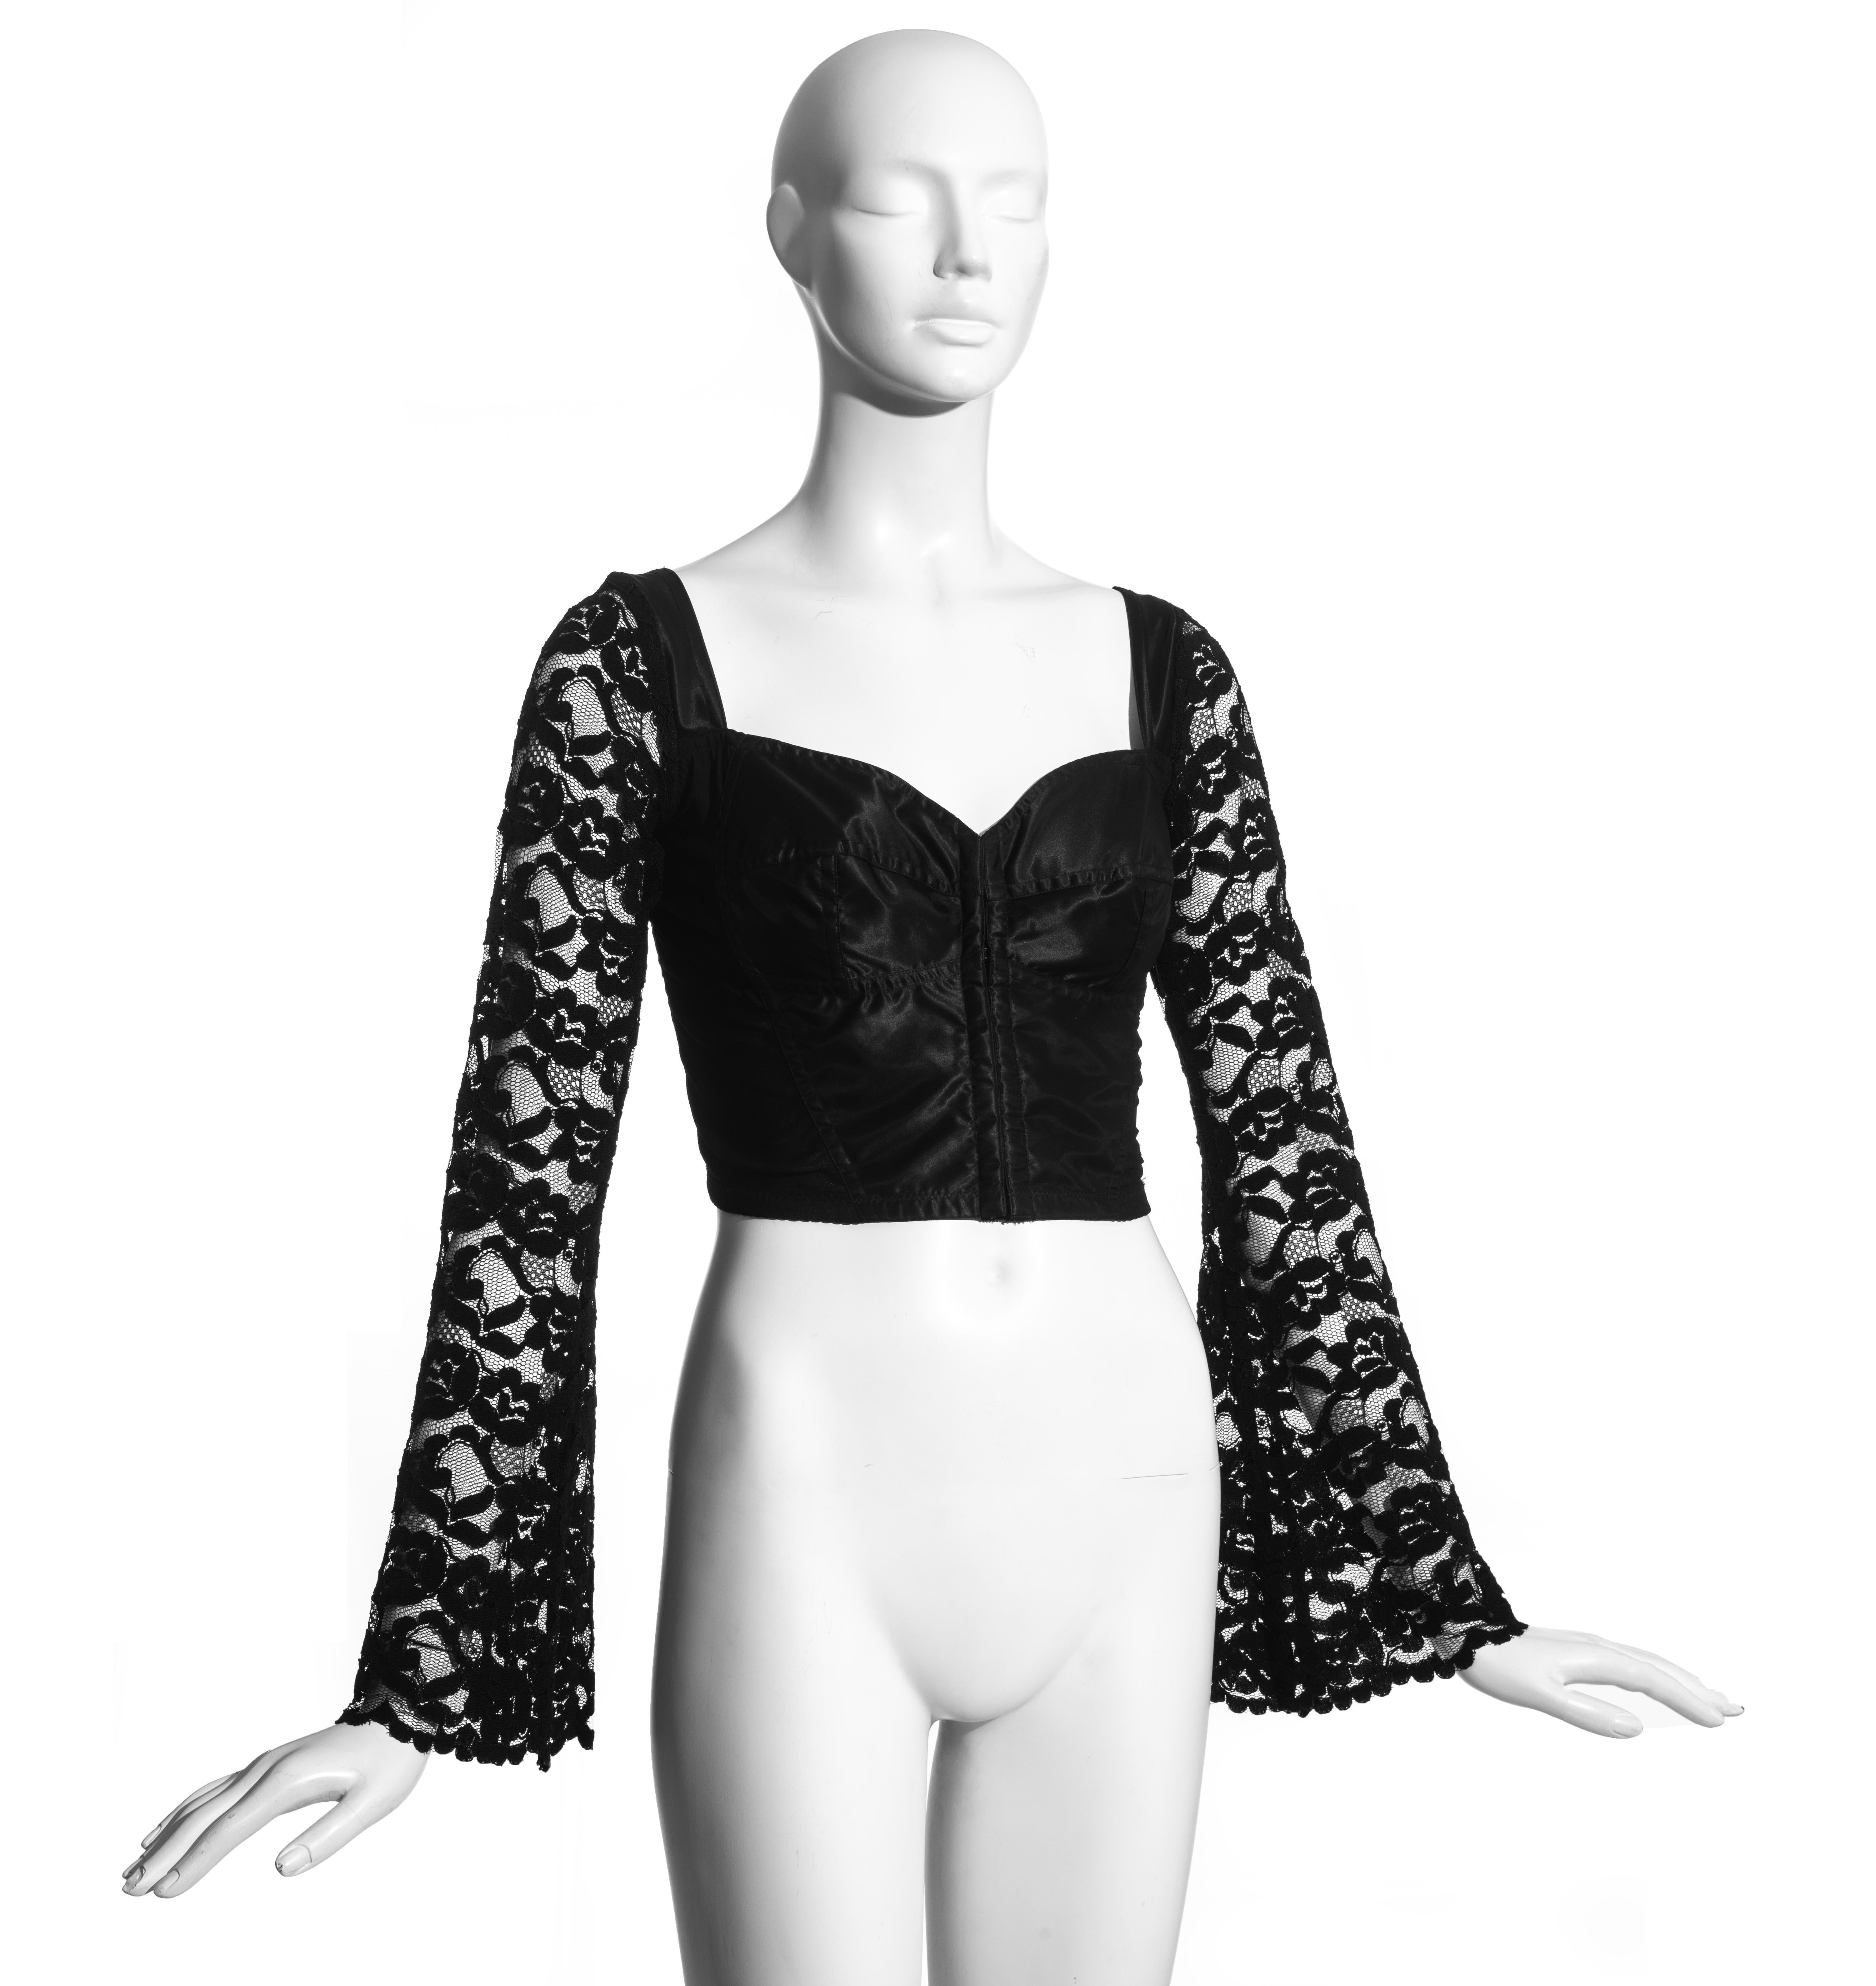 Women's or Men's Dolce & Gabbana black satin spandex and lace corset, ss 1993